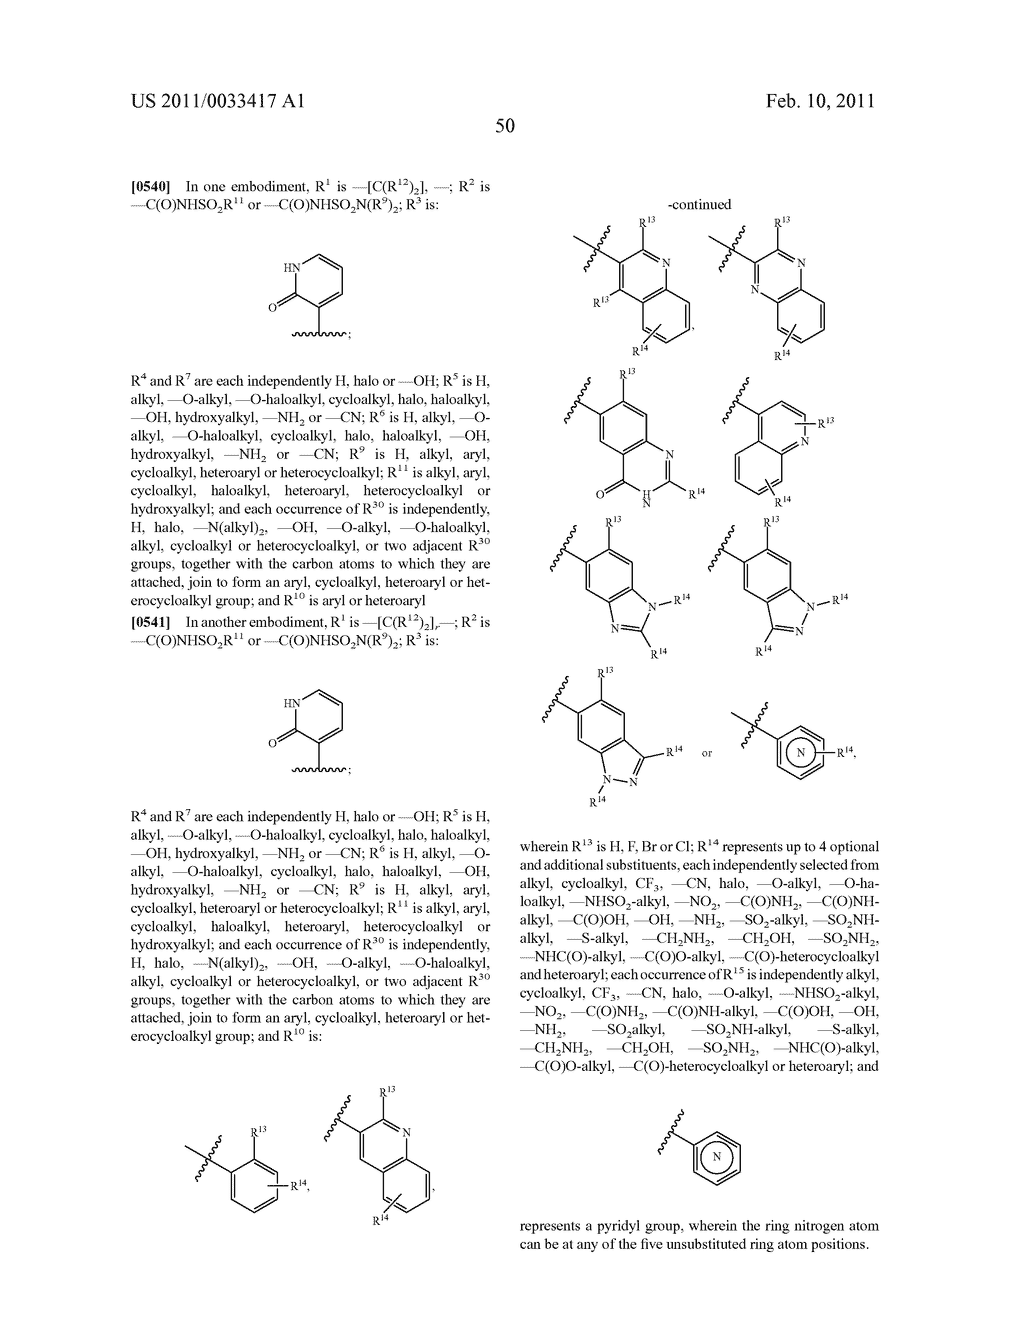 2,3-SUBSTITUTED INDOLE DERIVATIVES FOR TREATING VIRAL INFECTIONS - diagram, schematic, and image 51